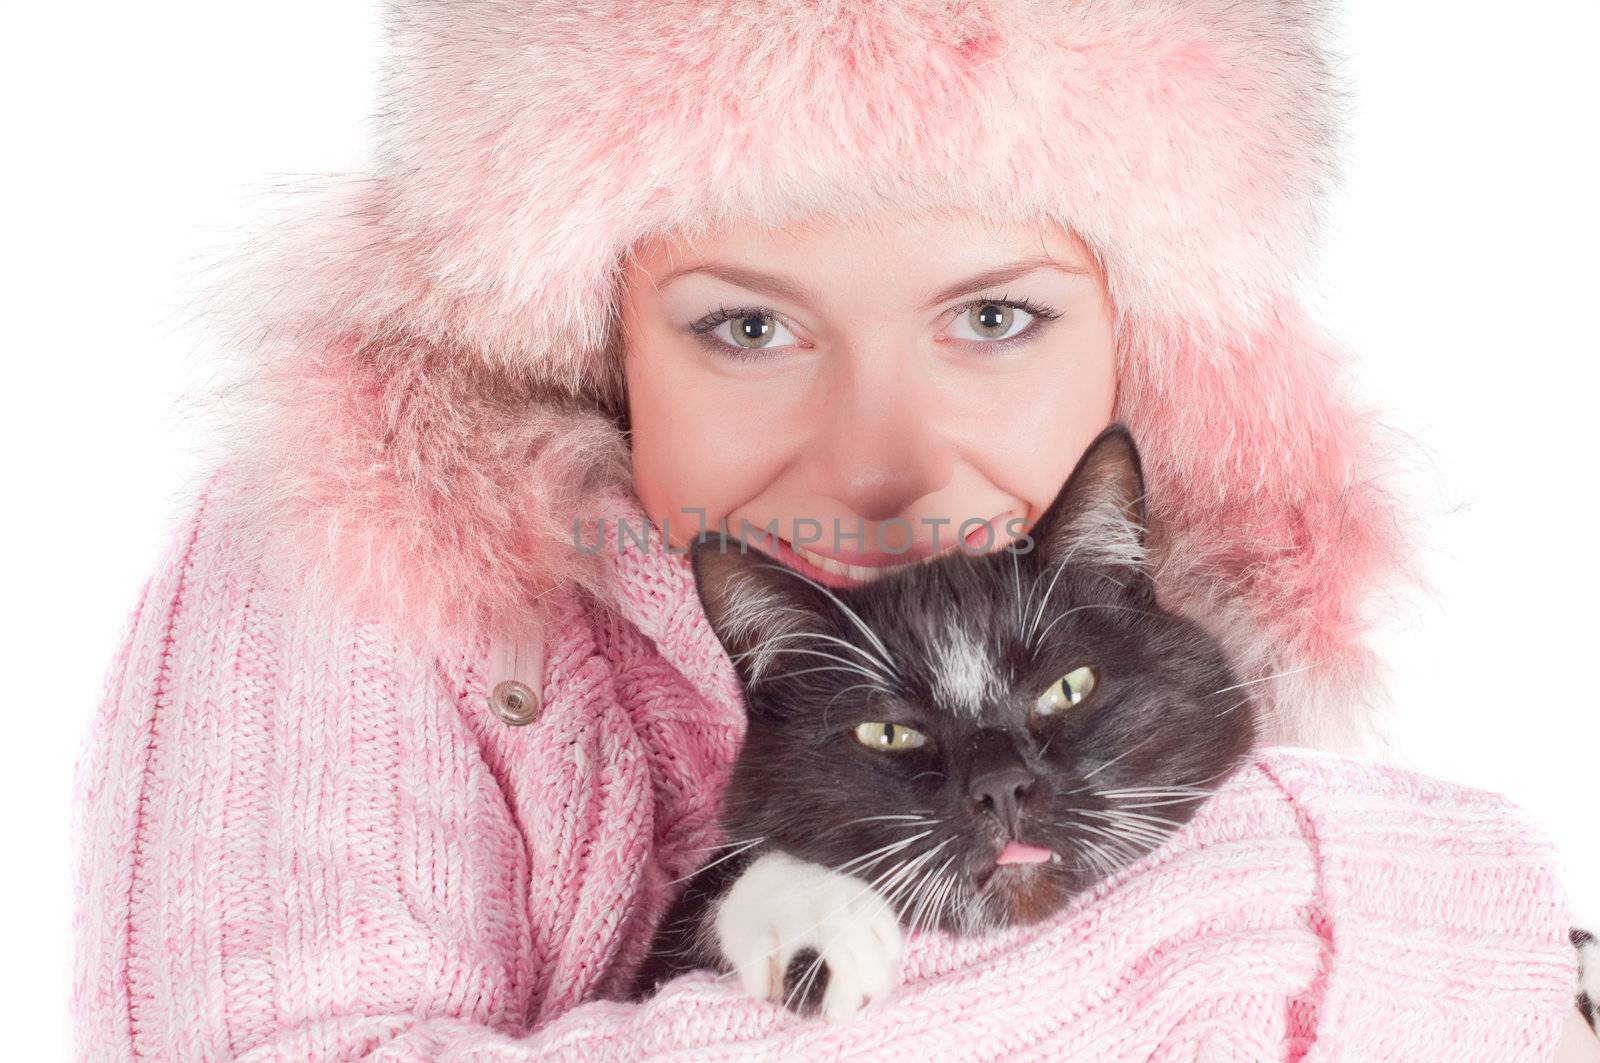 Woman in pink with black cat in studio